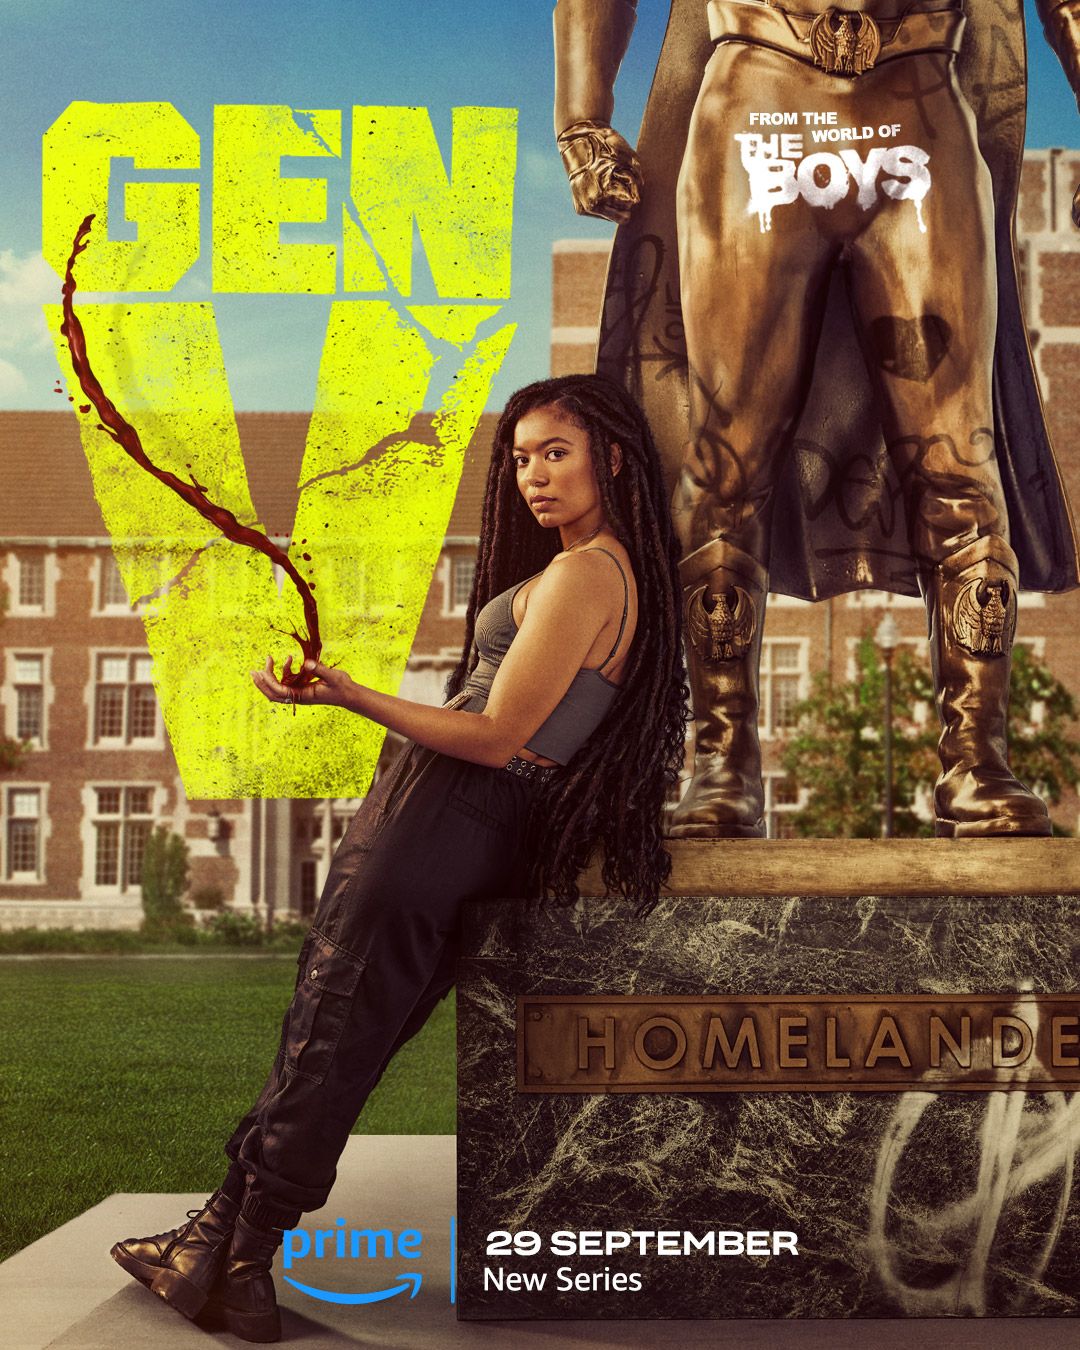 Gen V Episode 1-3 Review: The Boys spin-off starring Jaz Sinclair